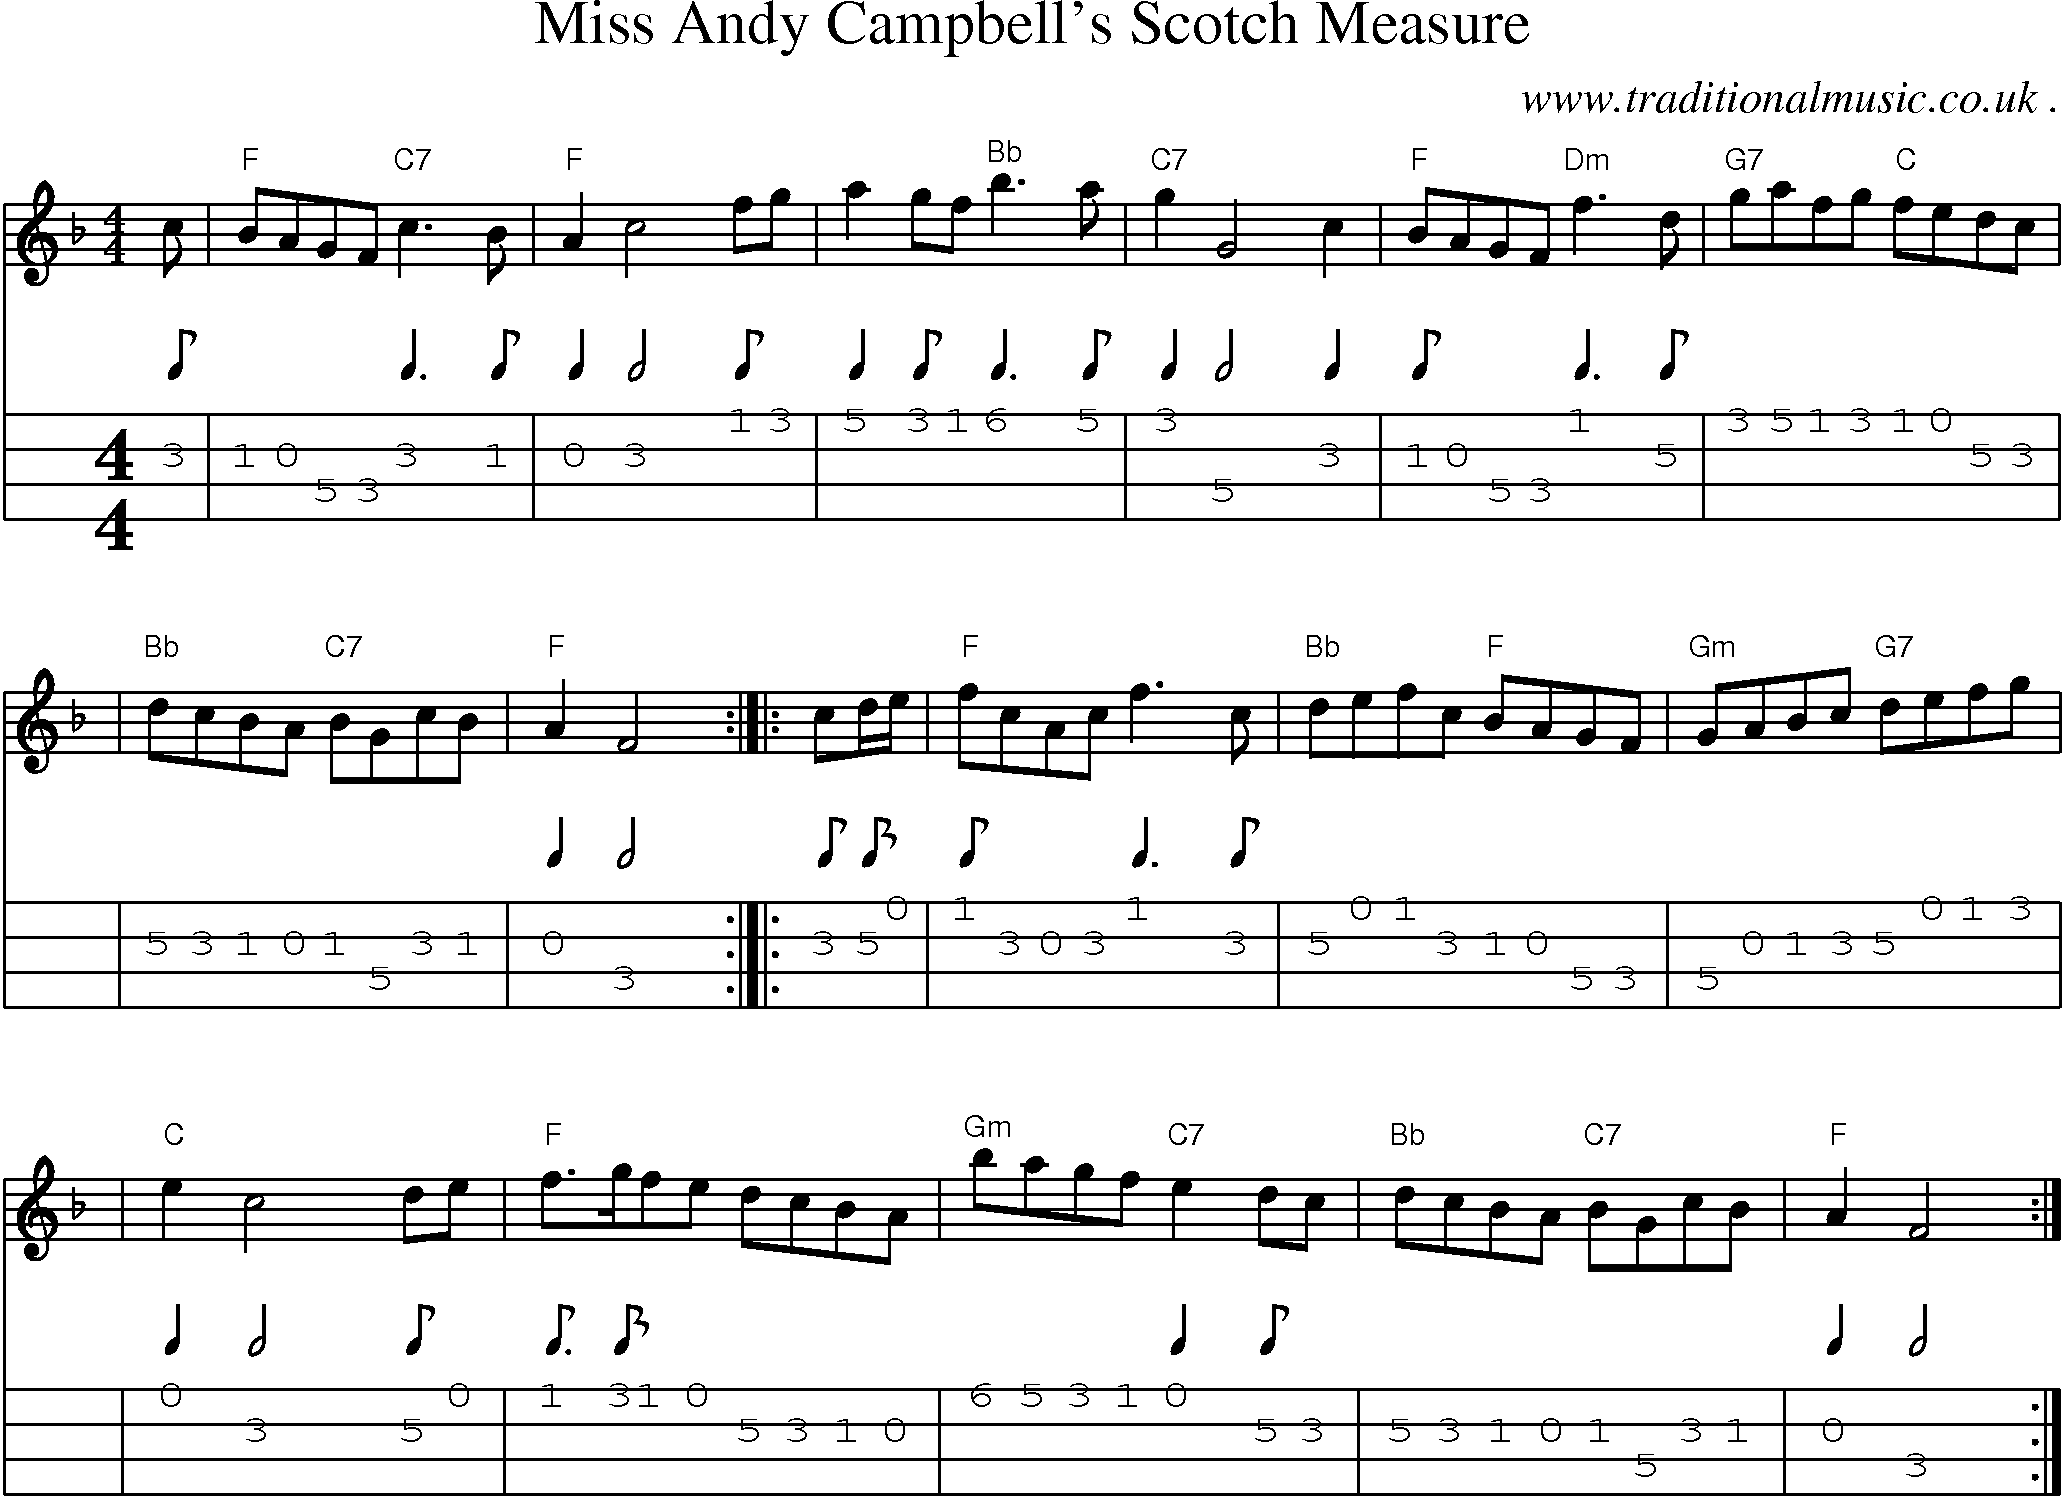 Sheet-music  score, Chords and Mandolin Tabs for Miss Andy Campbells Scotch Measure